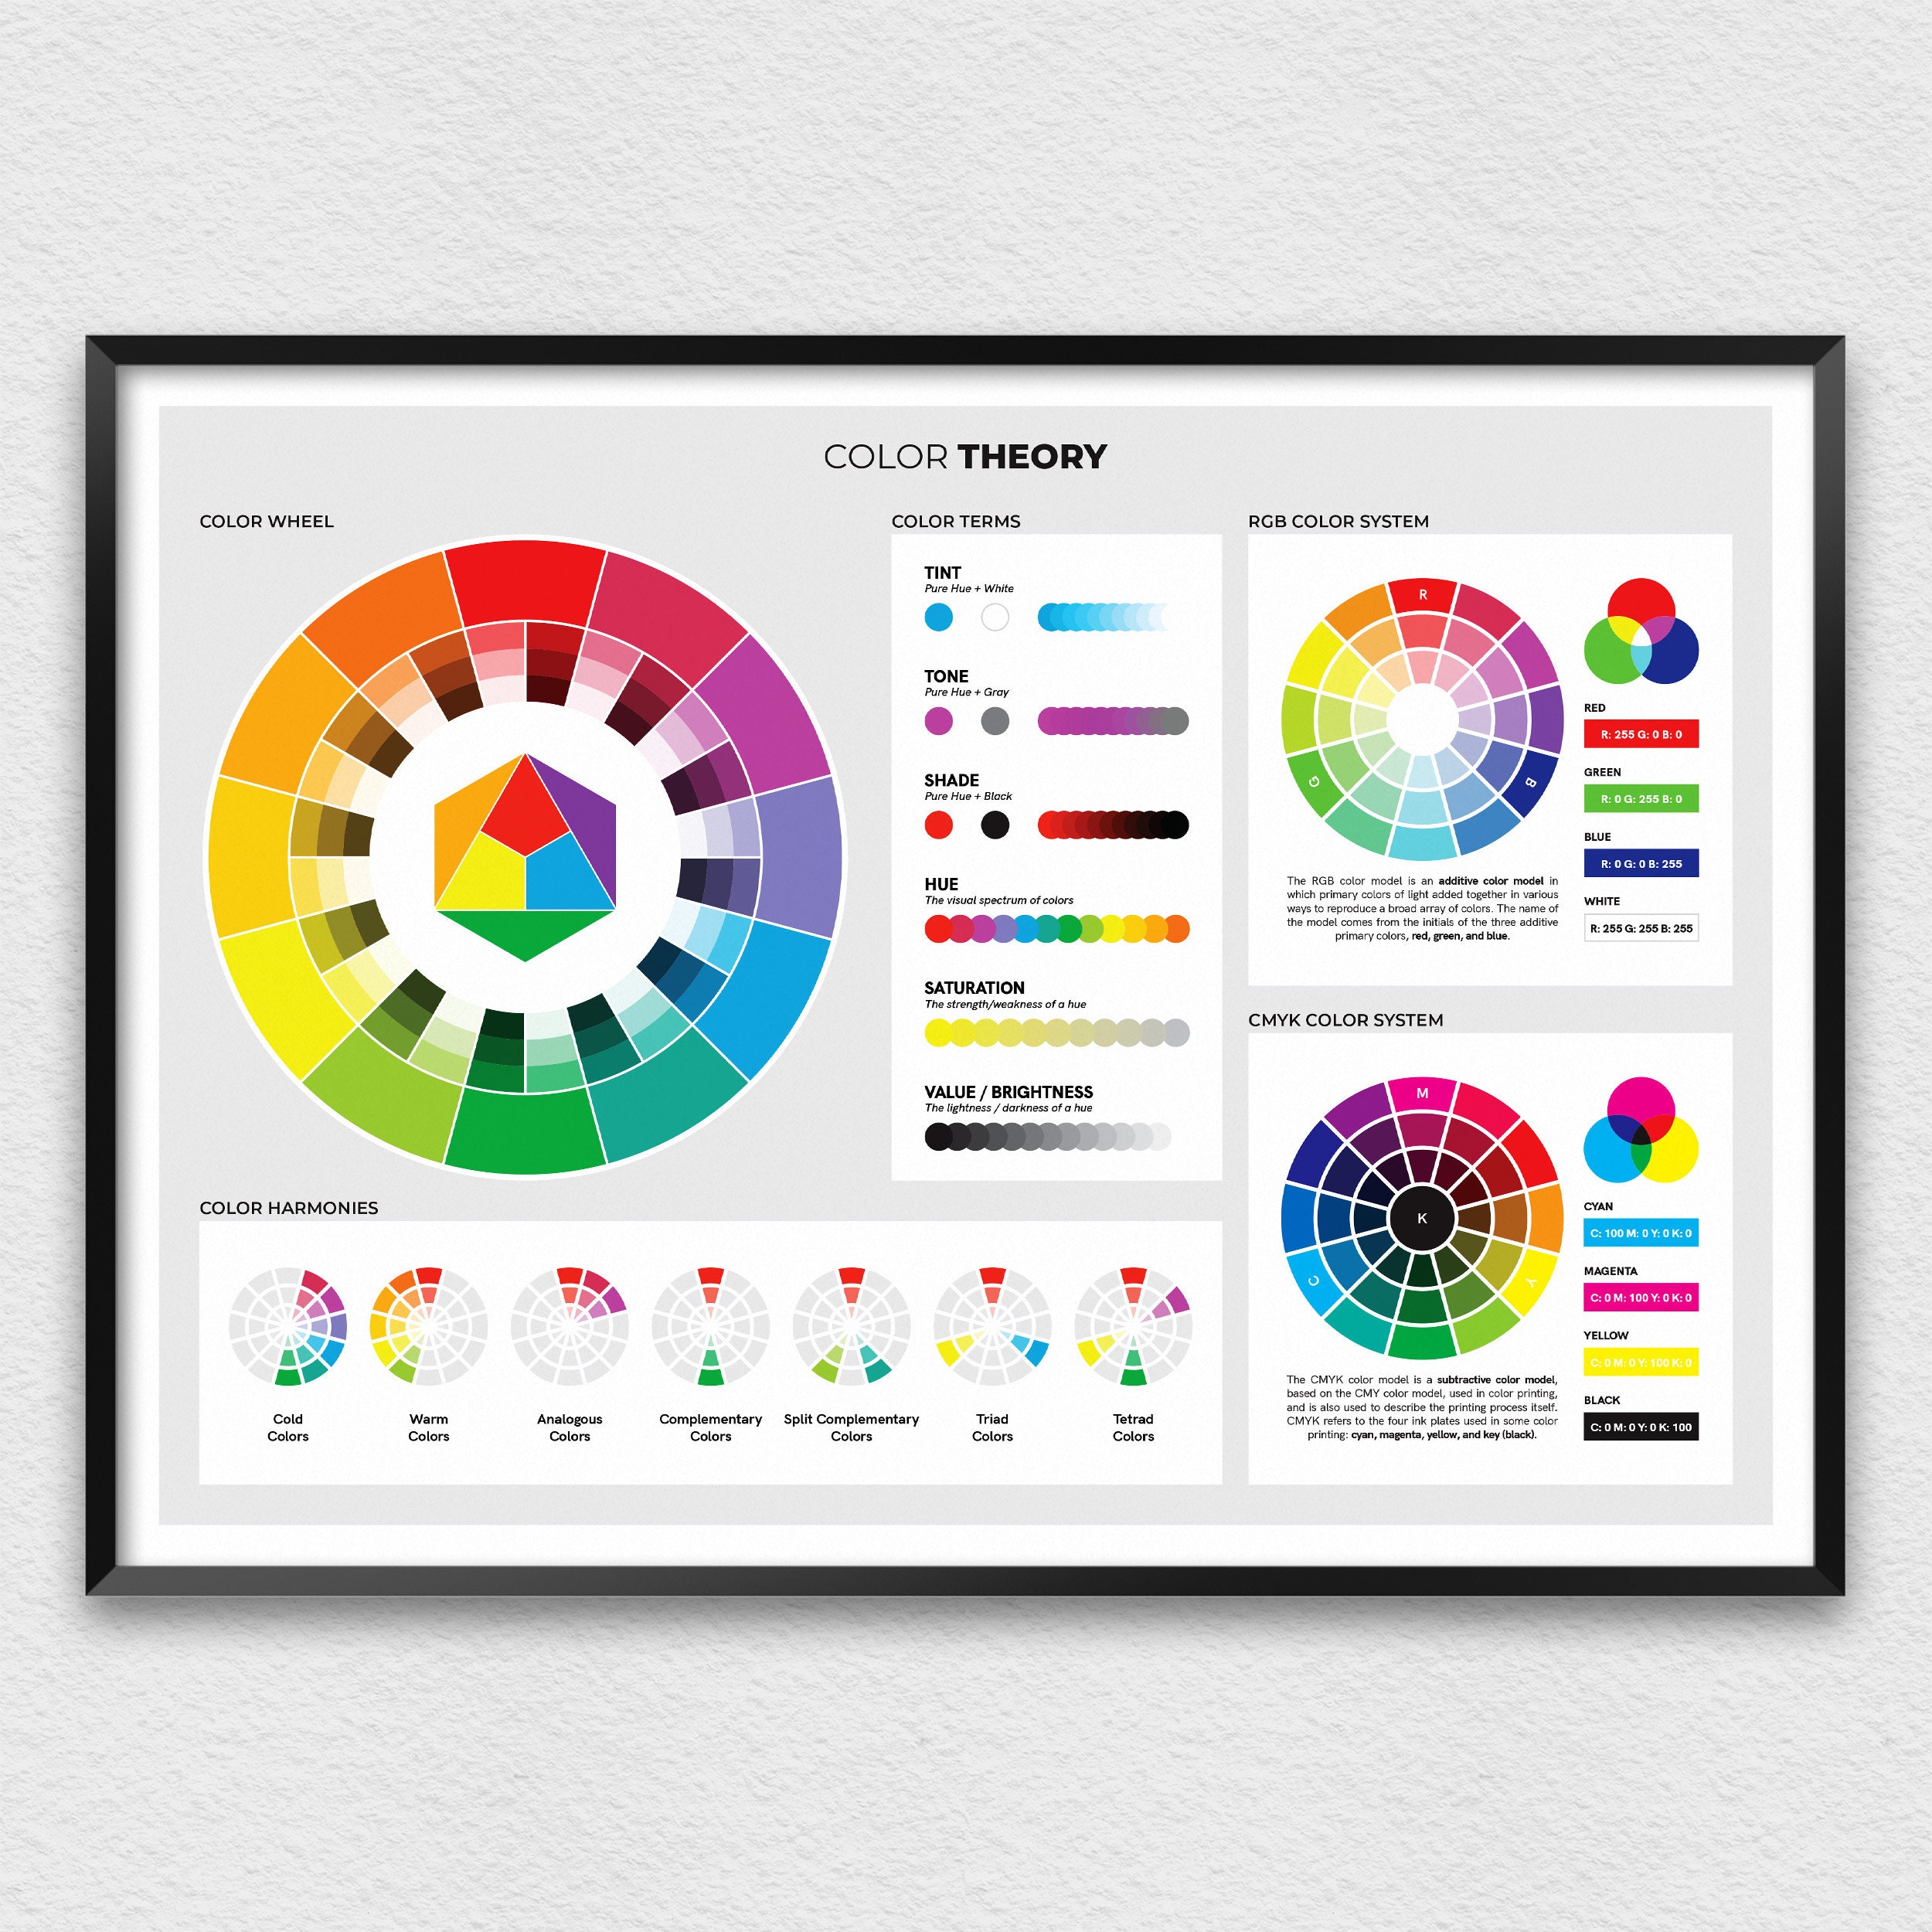 Self-printable CMYK Colour Wheel Print Test Chart, Digital File Download  Only for Printer Colour Testing, Print Your Own Color Wheel 